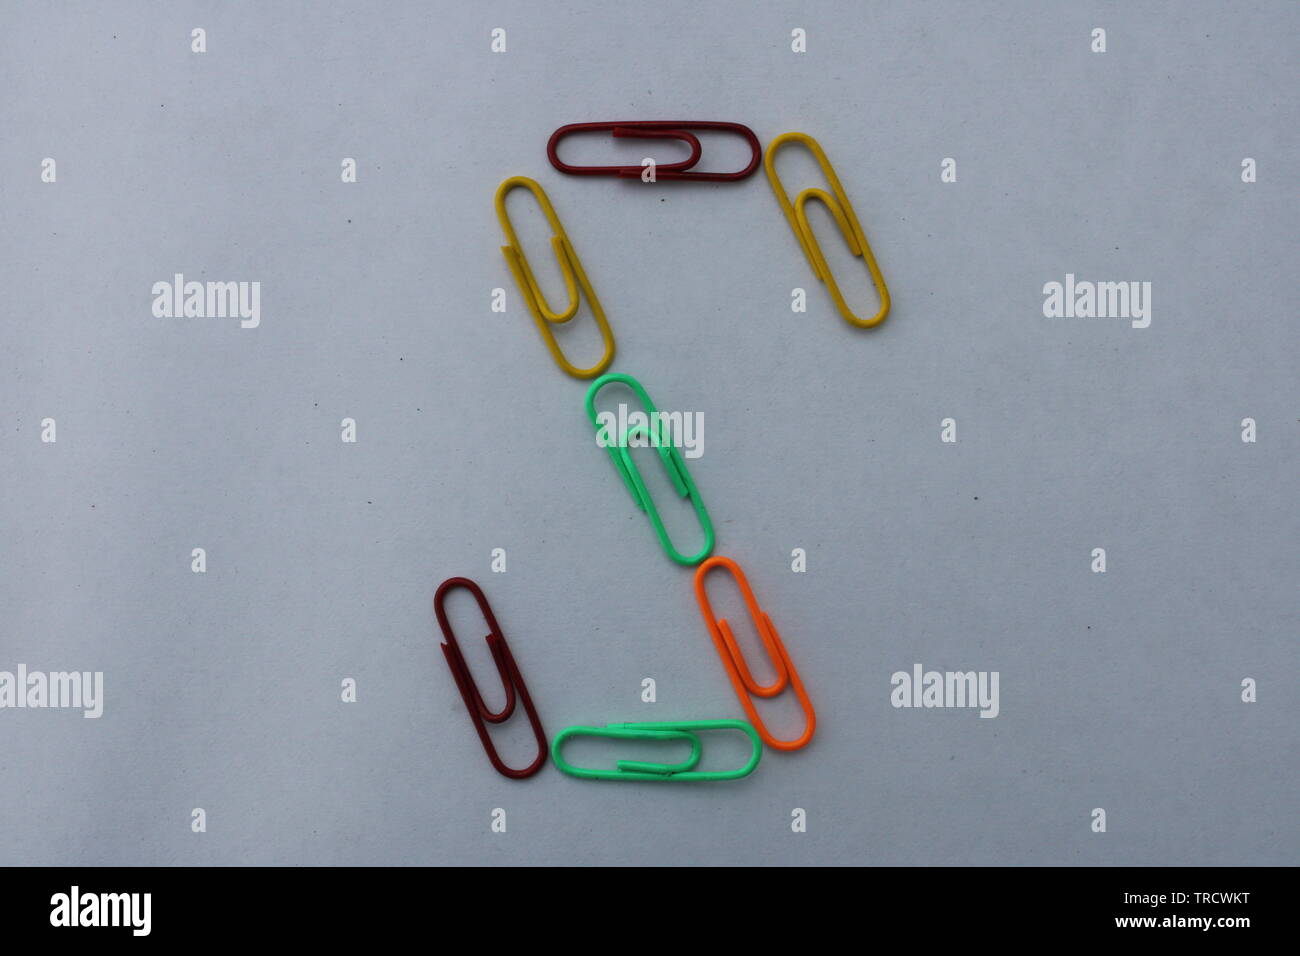 Letter S made with colorful paper clips on white background Stock Photo